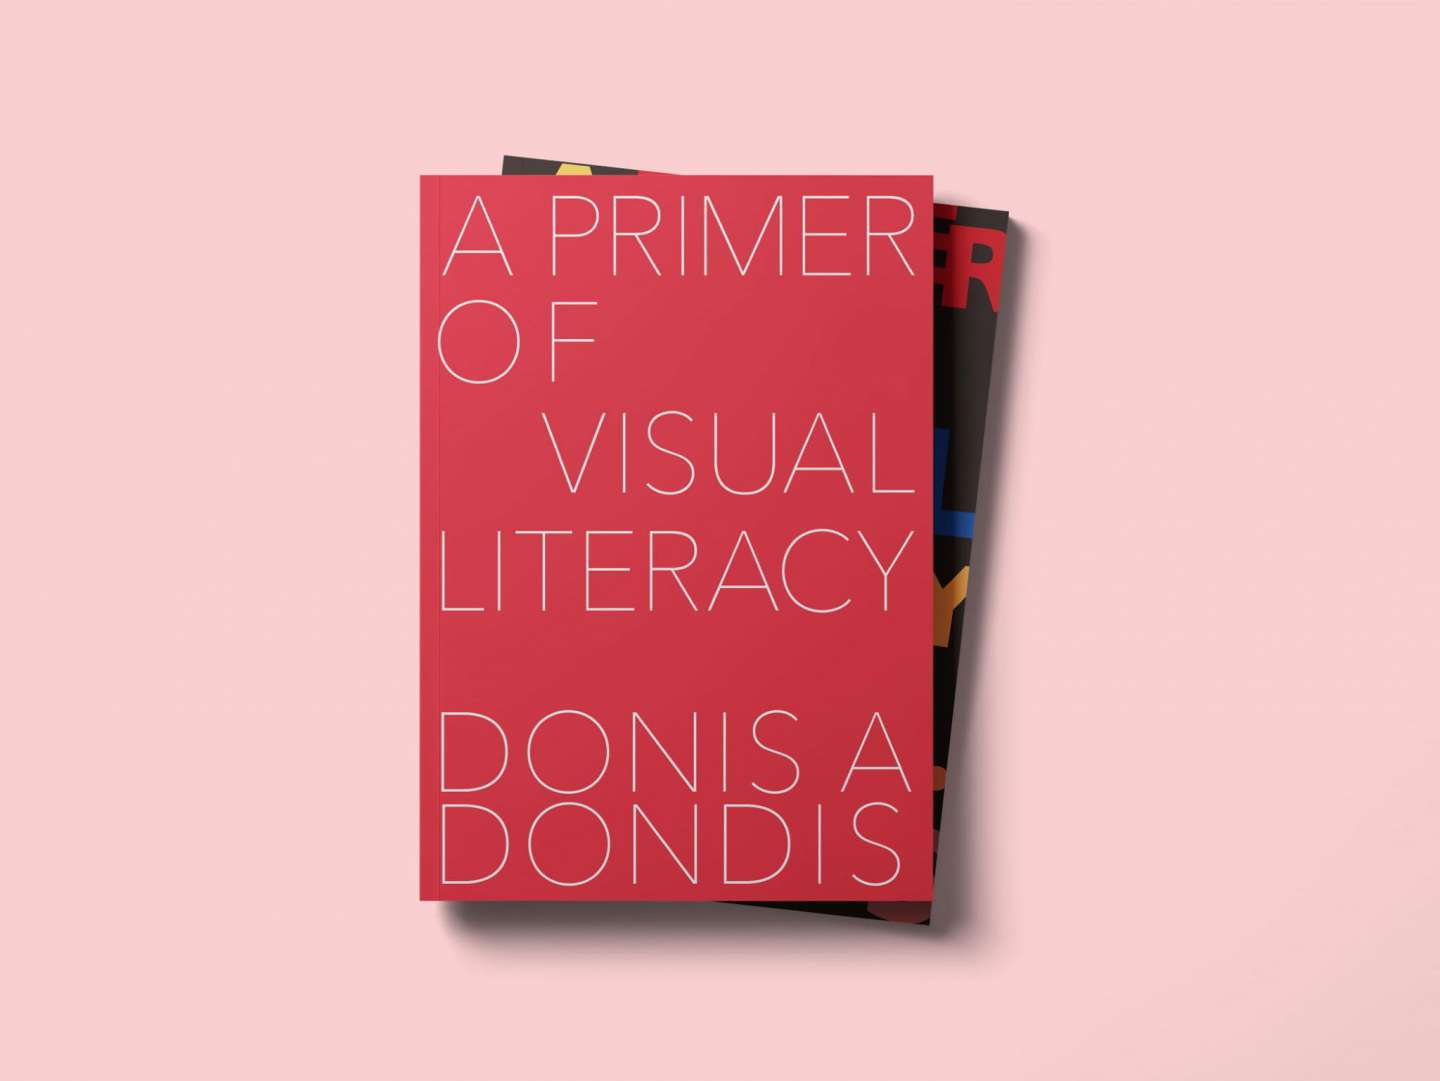 Redesign "A Primer of Visual Literacy"